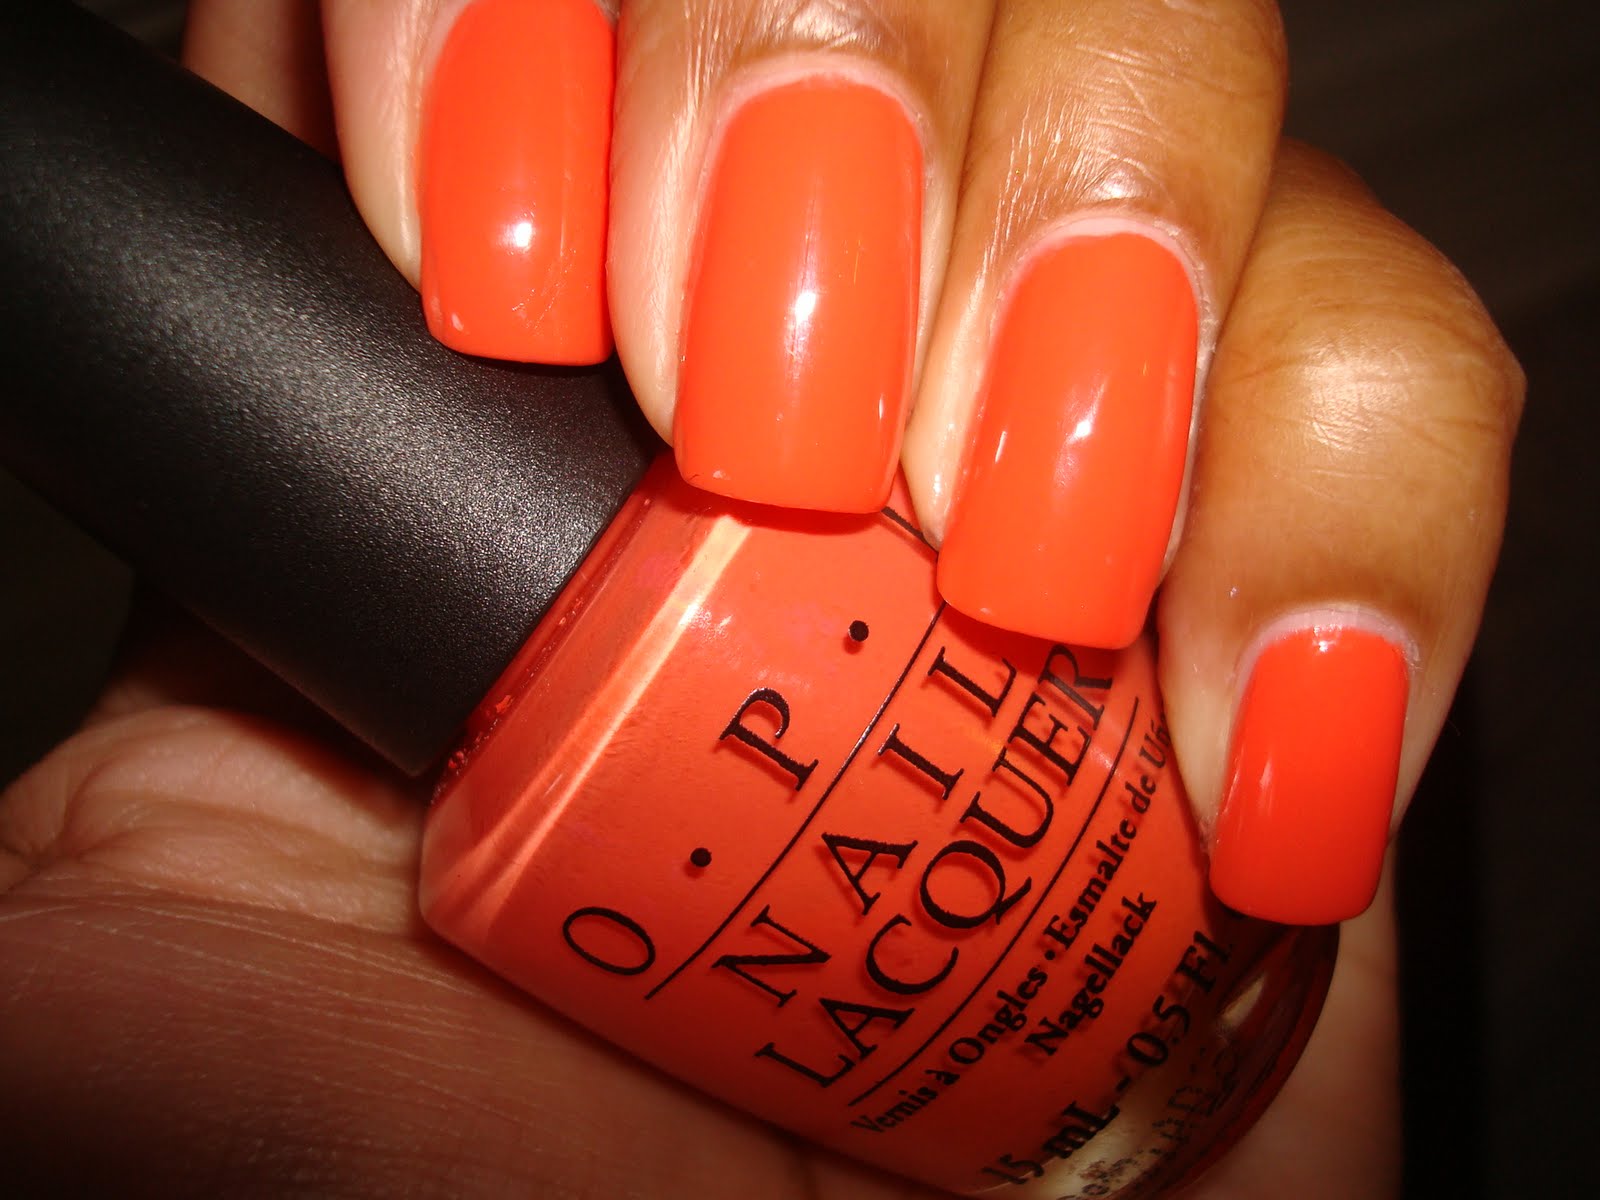 1. OPI Nail Lacquer in "Hot & Spicy" - wide 2